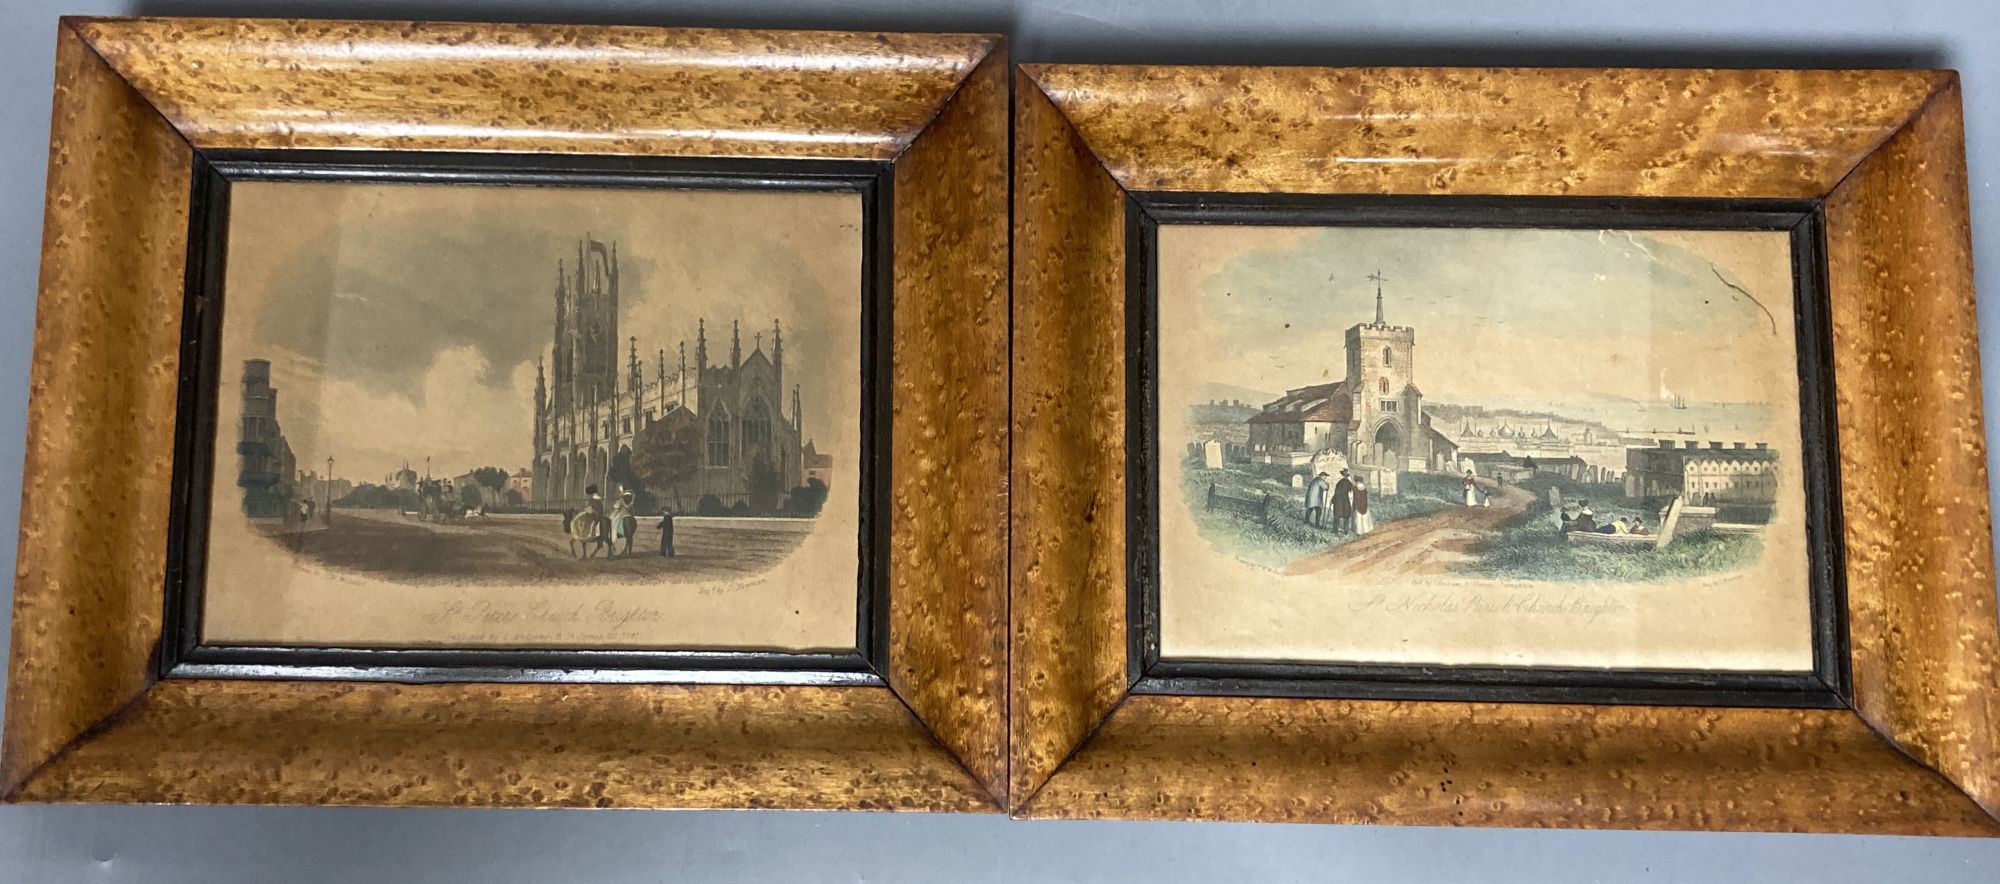 A pair of 19th century coloured prints of Brighton - St Peters Church and St Nicholas Paris Church, both maple framed, 11.5 x 16.5